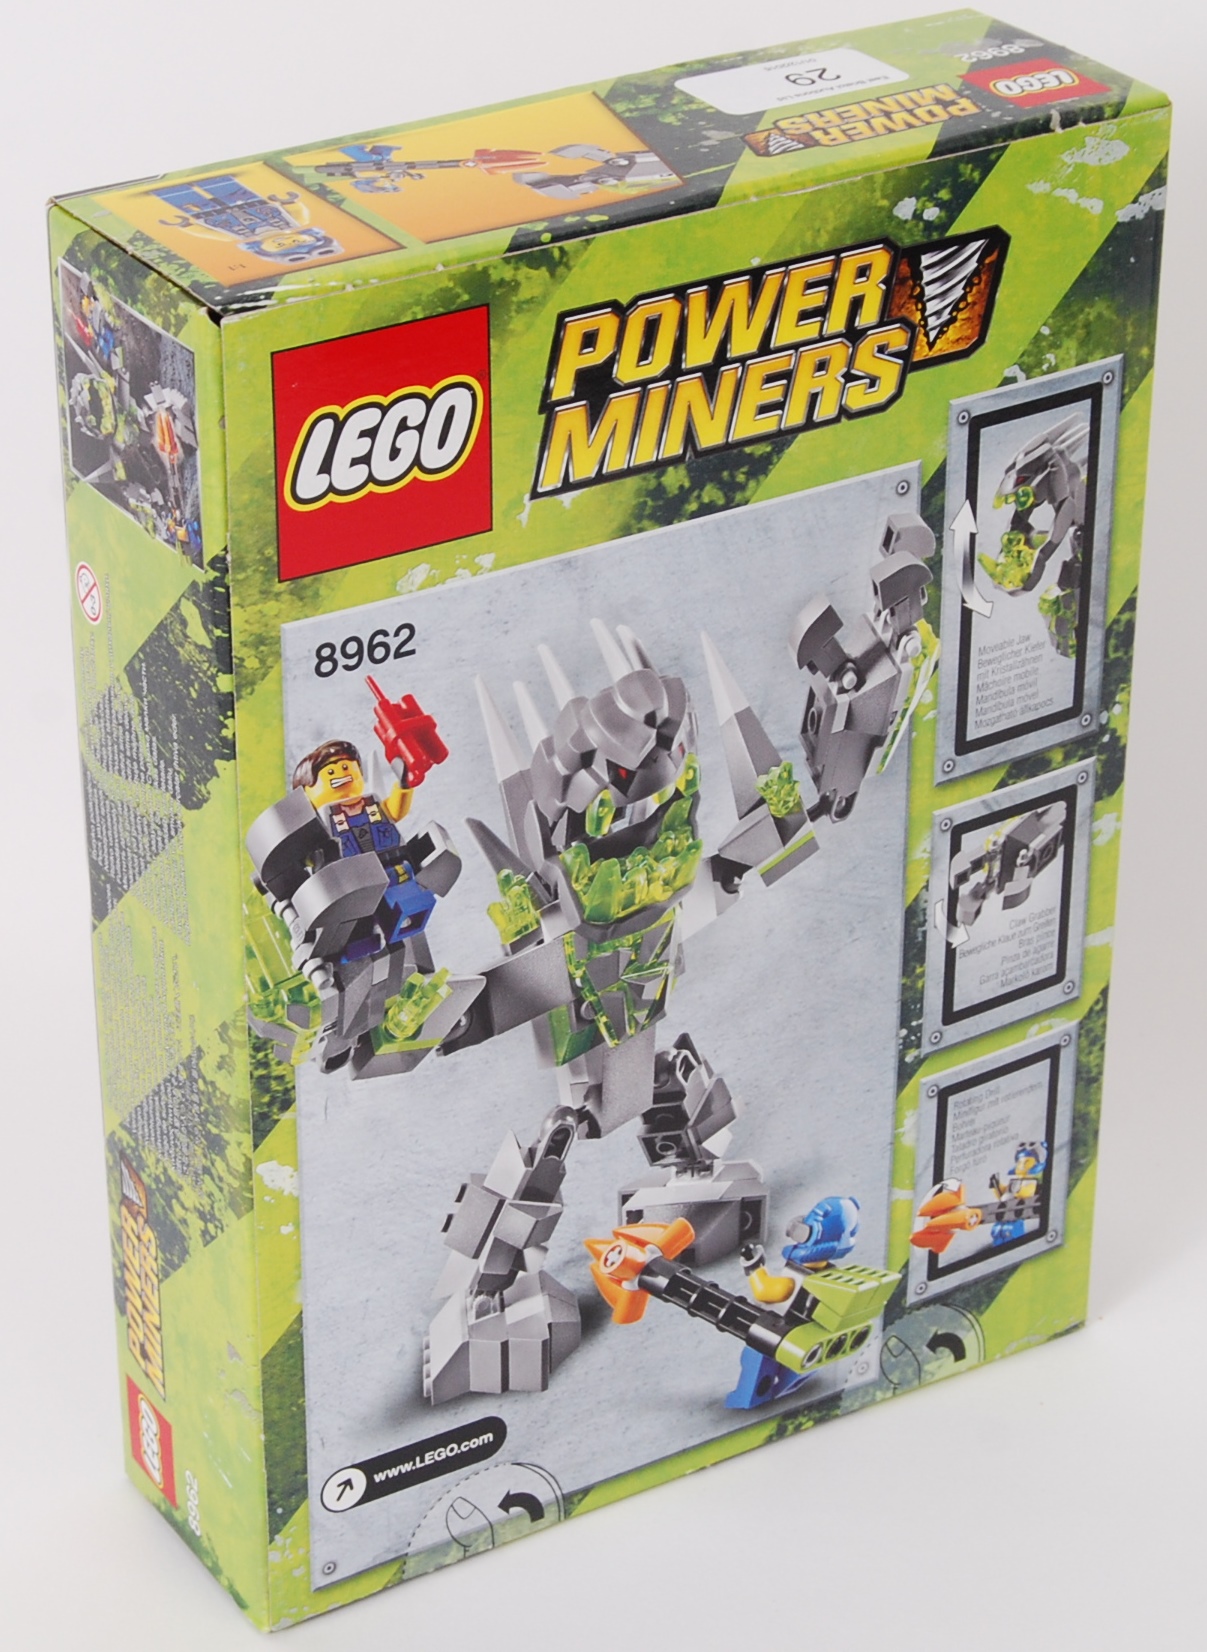 LEGO POWER MINERS: A Lego Power Minors 'Crystal King' set 8962. - Image 2 of 2